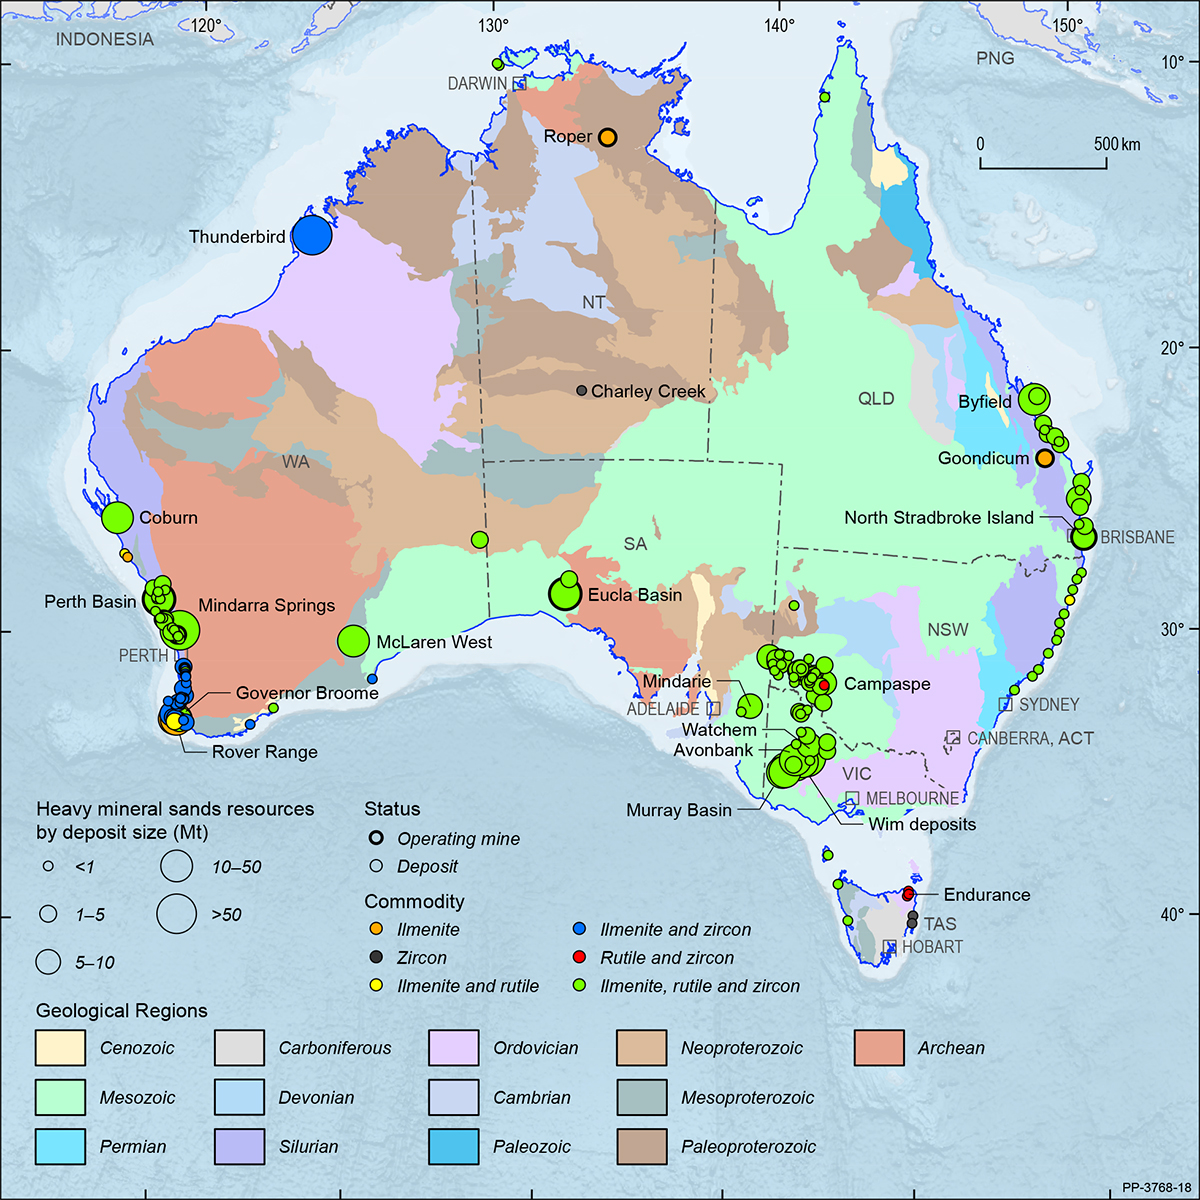 A map showing the Australian continent shaded by the ages of the main geological provinces highlighting the geographical distribution of Australian heavy mineral sands deposits and operating mines in 2019.